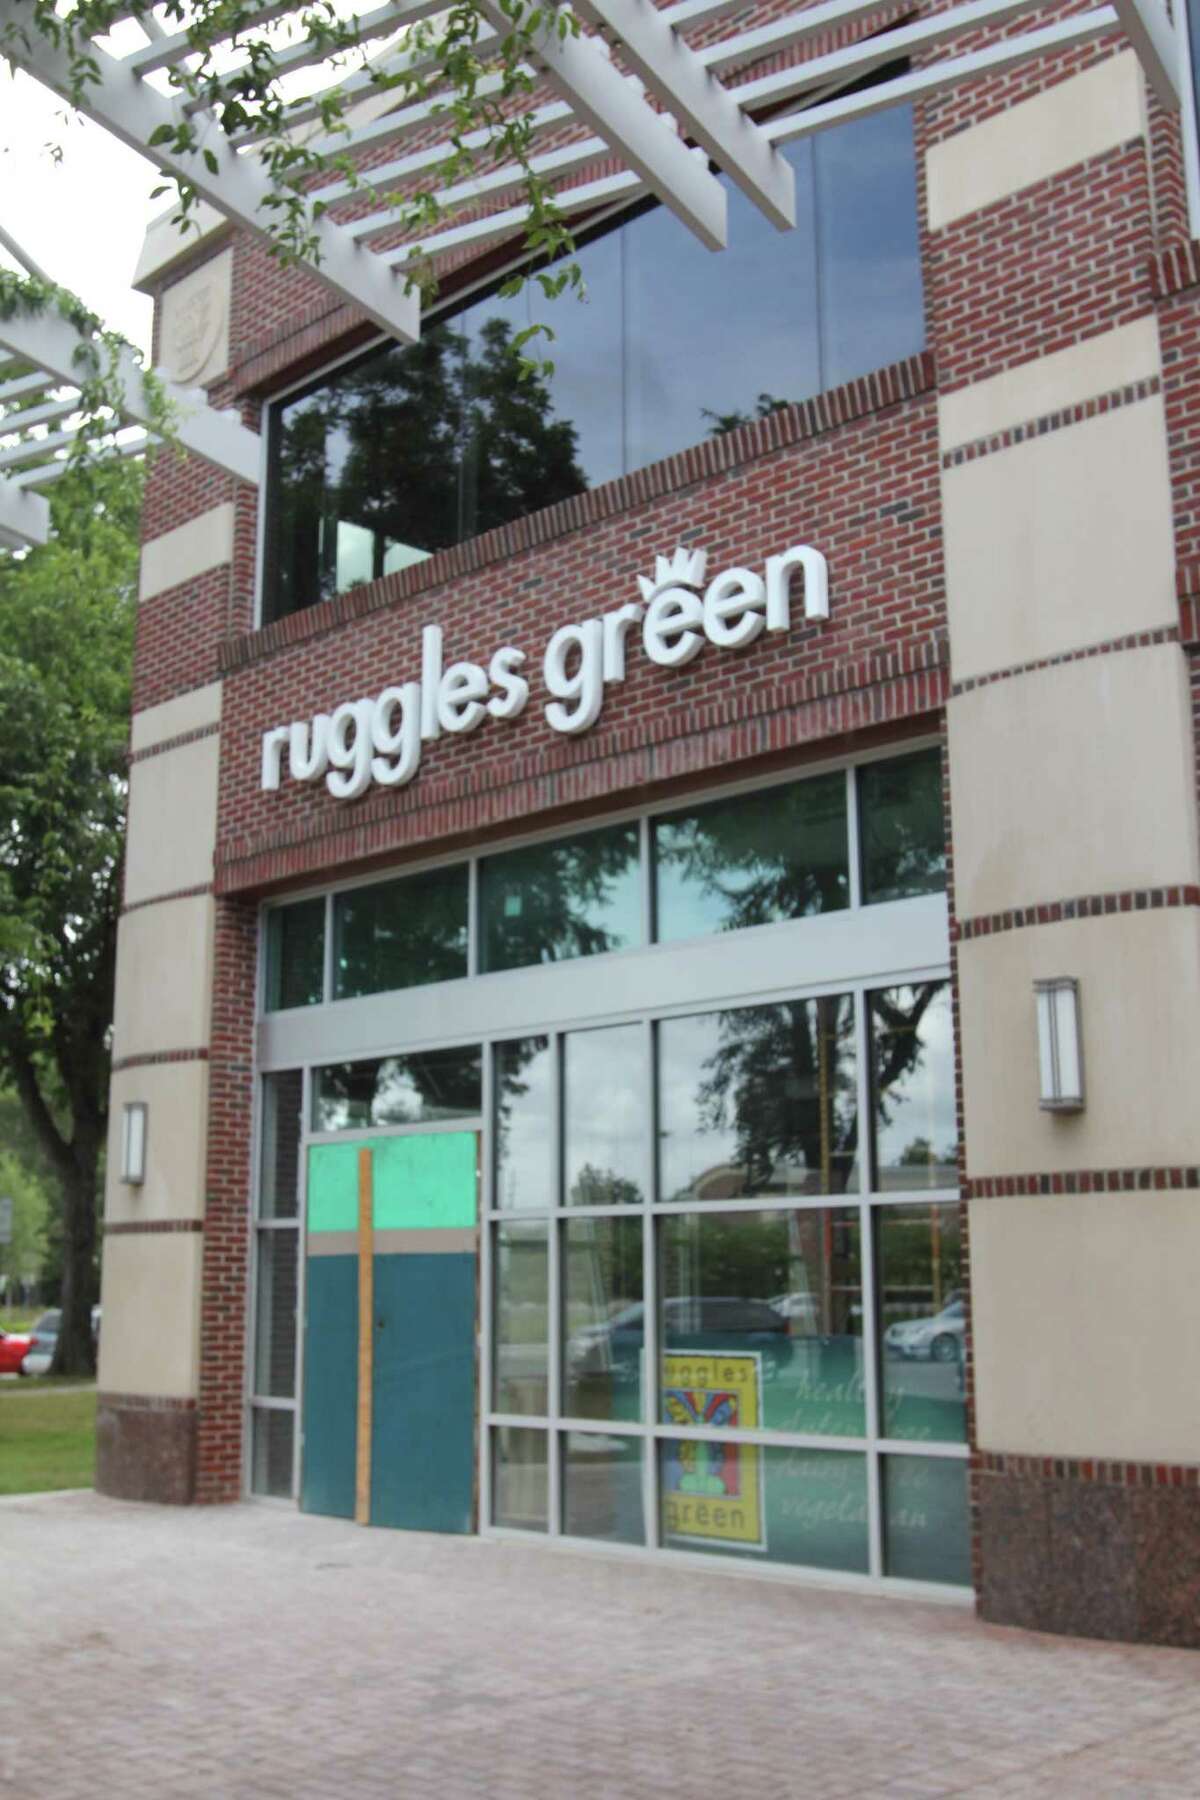 Ruggles Green will be among the newest additions at Sugar Land Town Square.